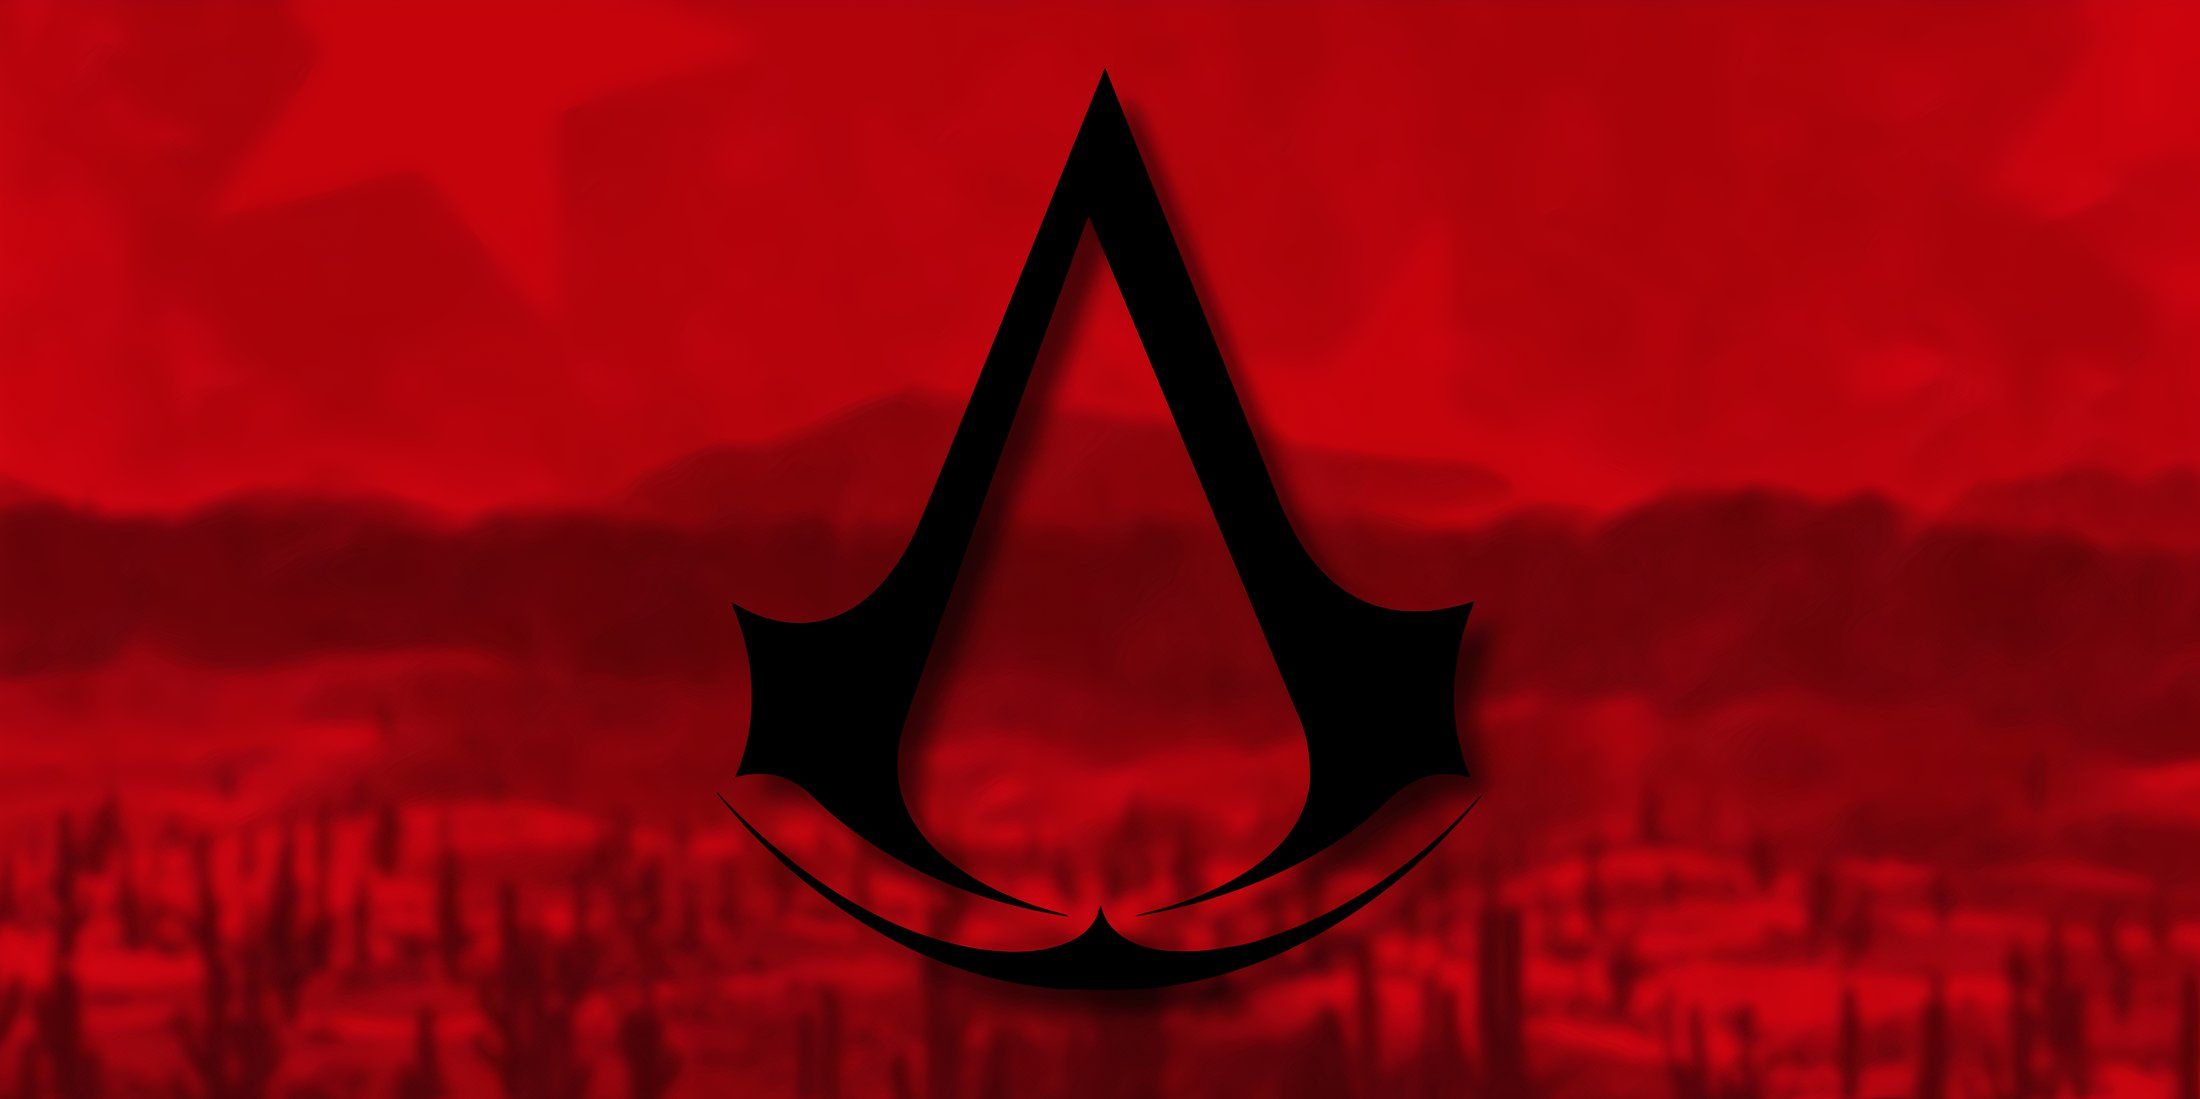 A PSN Avatar Could Be a Springboard To The Next Great Assassin’s Creed Setting